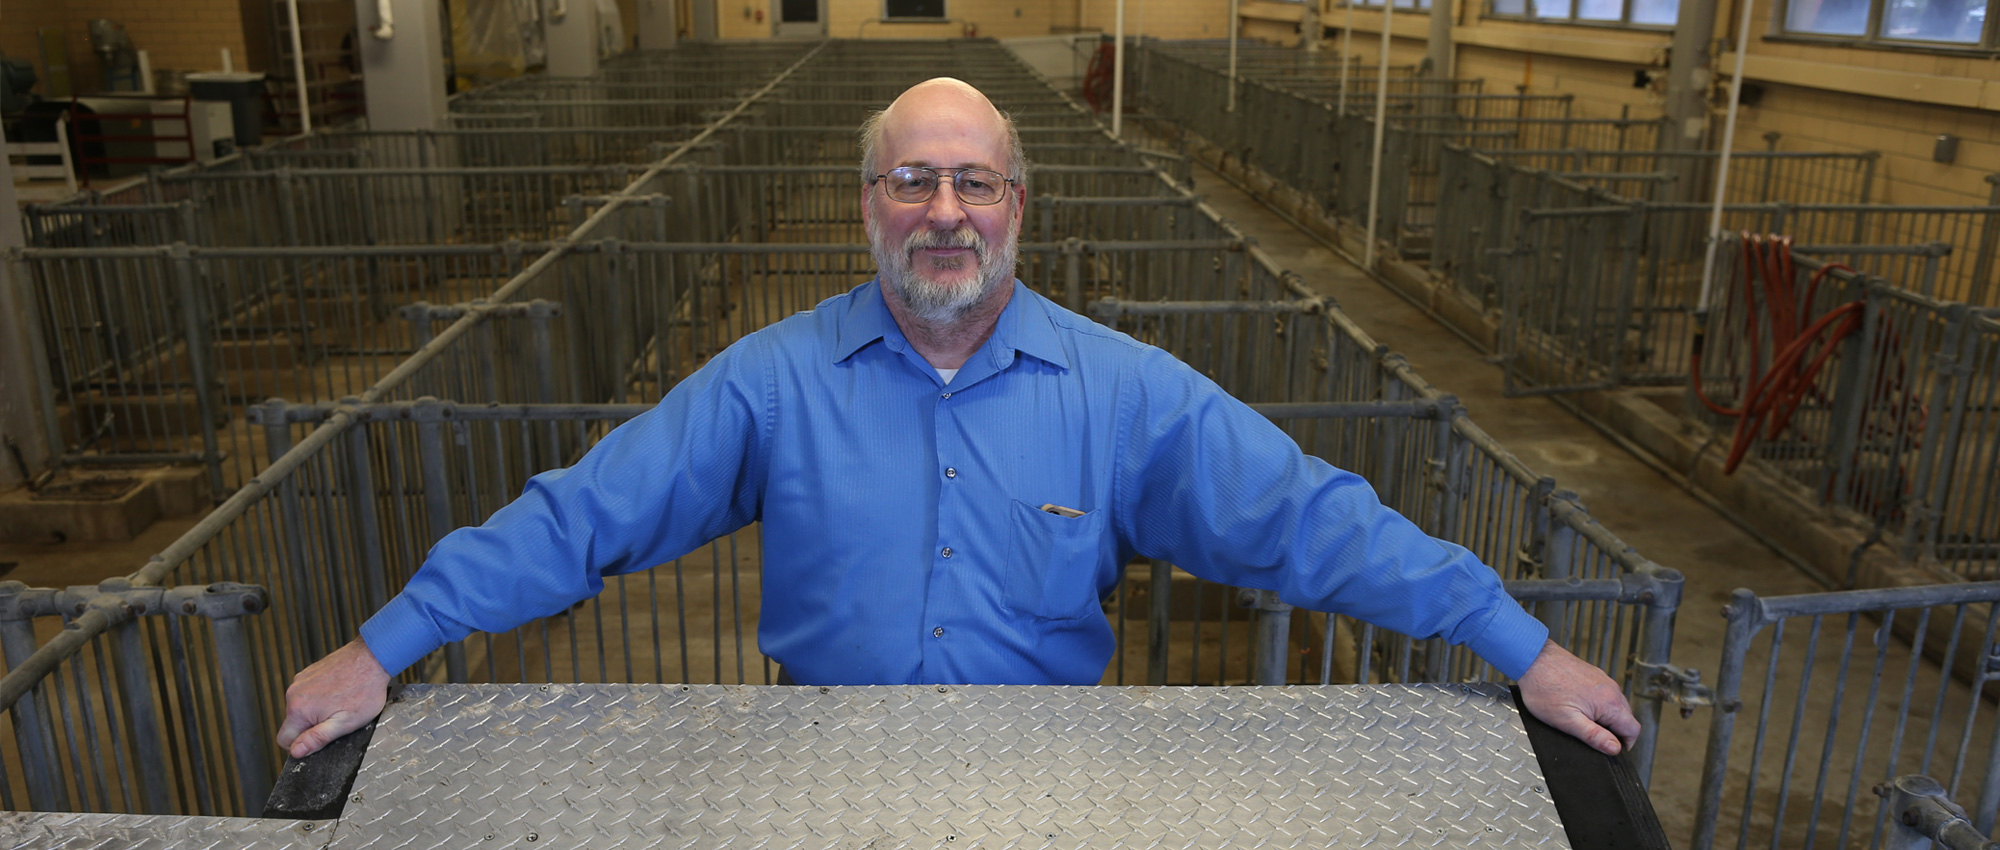 Robert Stwalley holds a 2 foot by 4 foot aluminum tread cooling pad